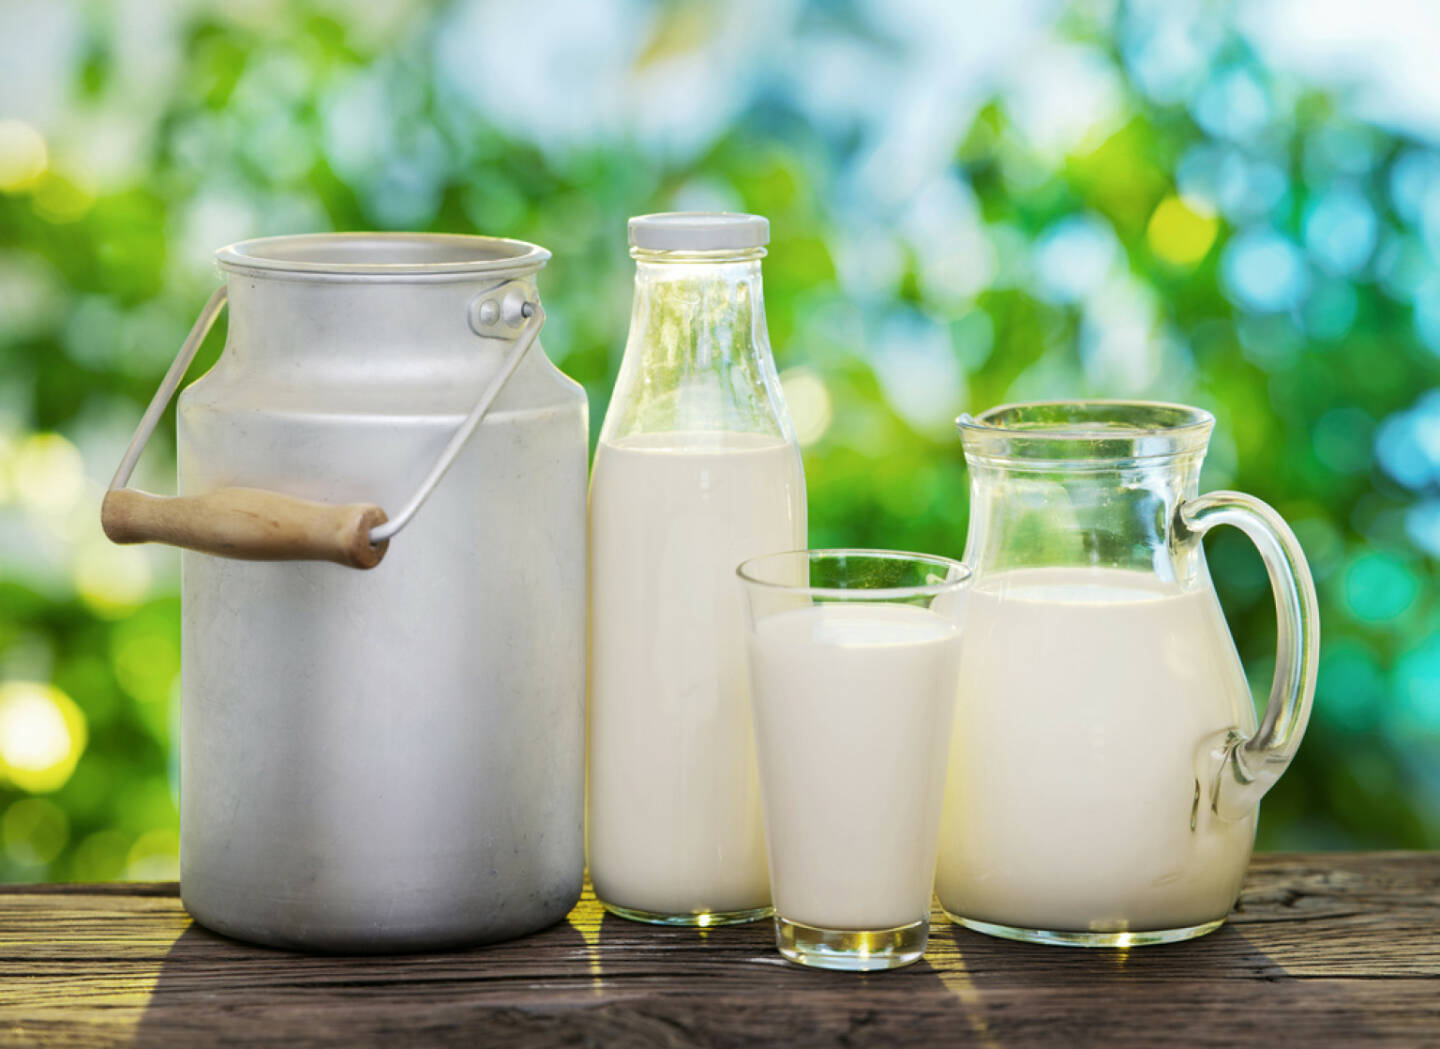 Milch, http://www.shutterstock.com/de/pic-167864297/stock-photo-milk-in-various-dishes-on-the-old-wooden-table-in-an-outdoor-setting.html